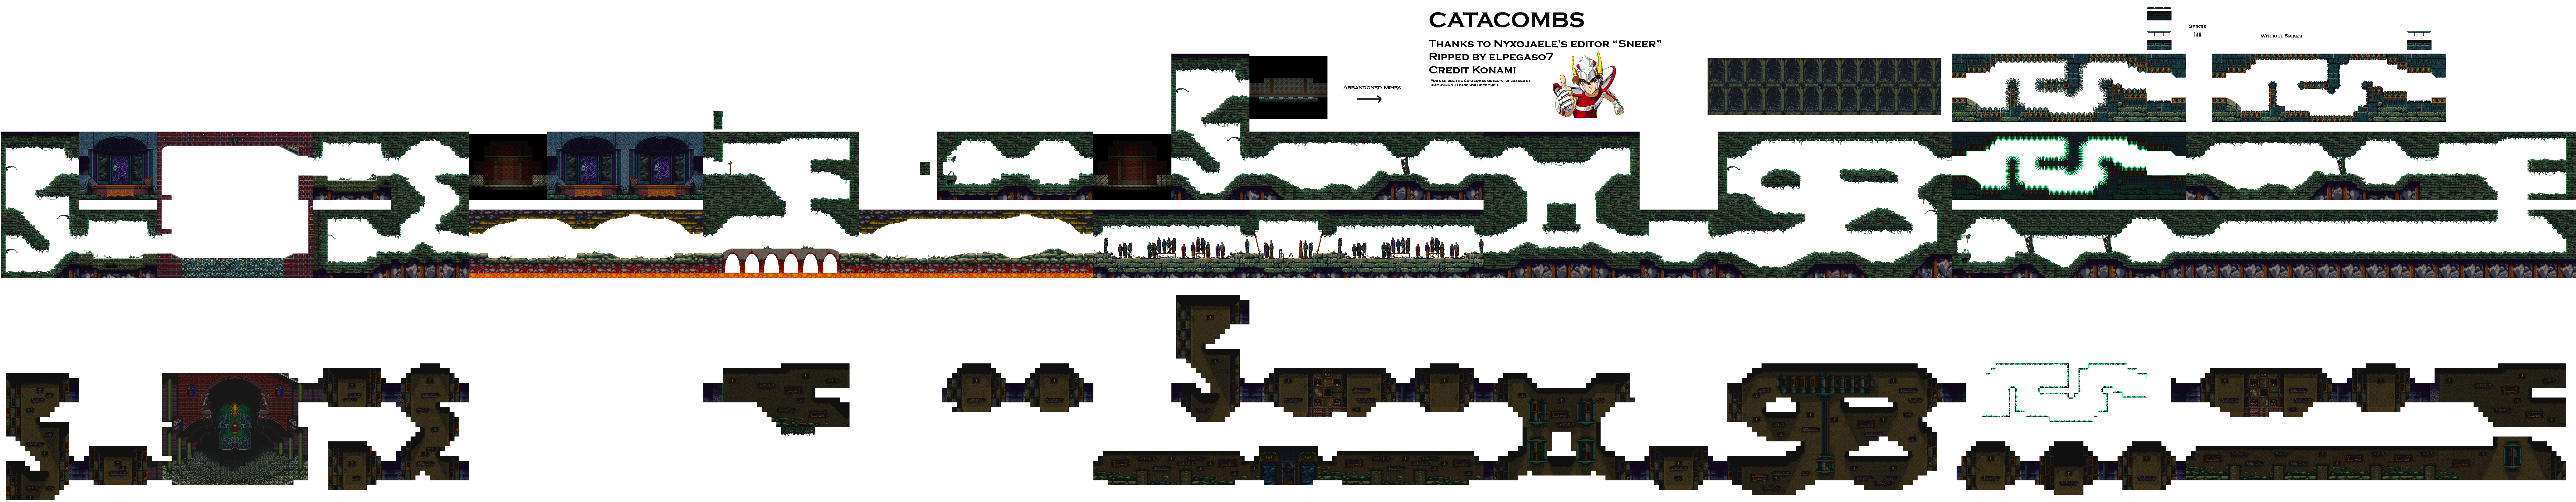 Castlevania: Symphony of the Night - Catacombs Transparent Background